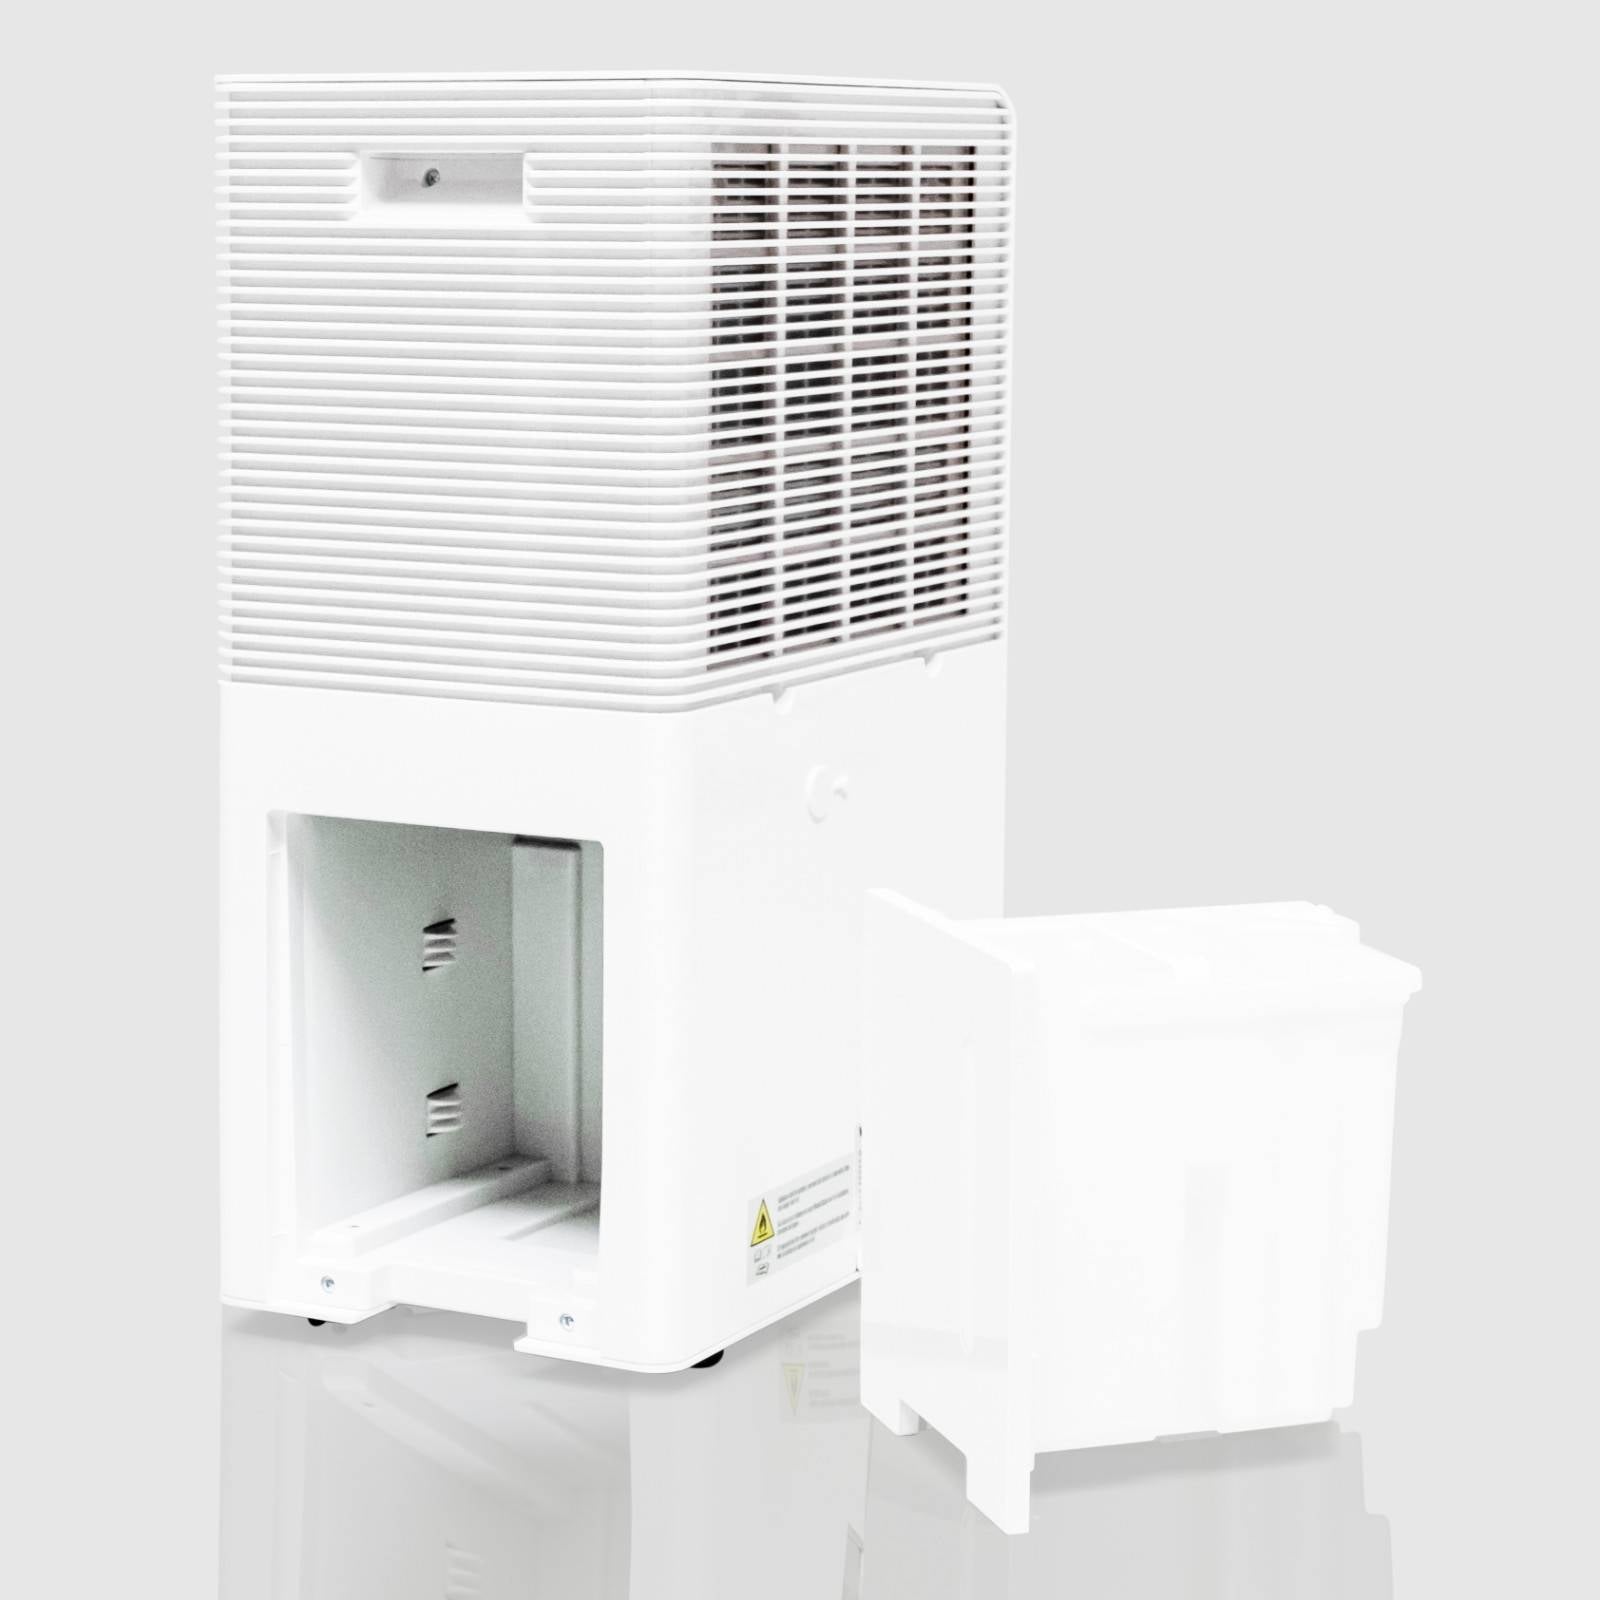 Rear angled view of the White Westinghouse Dehumidifier AWHD40 with the water tank removed, showcasing the back air vent and water tank compartment. The sleek white design is suitable for maintaining optimal humidity levels in residential and commercial spaces.